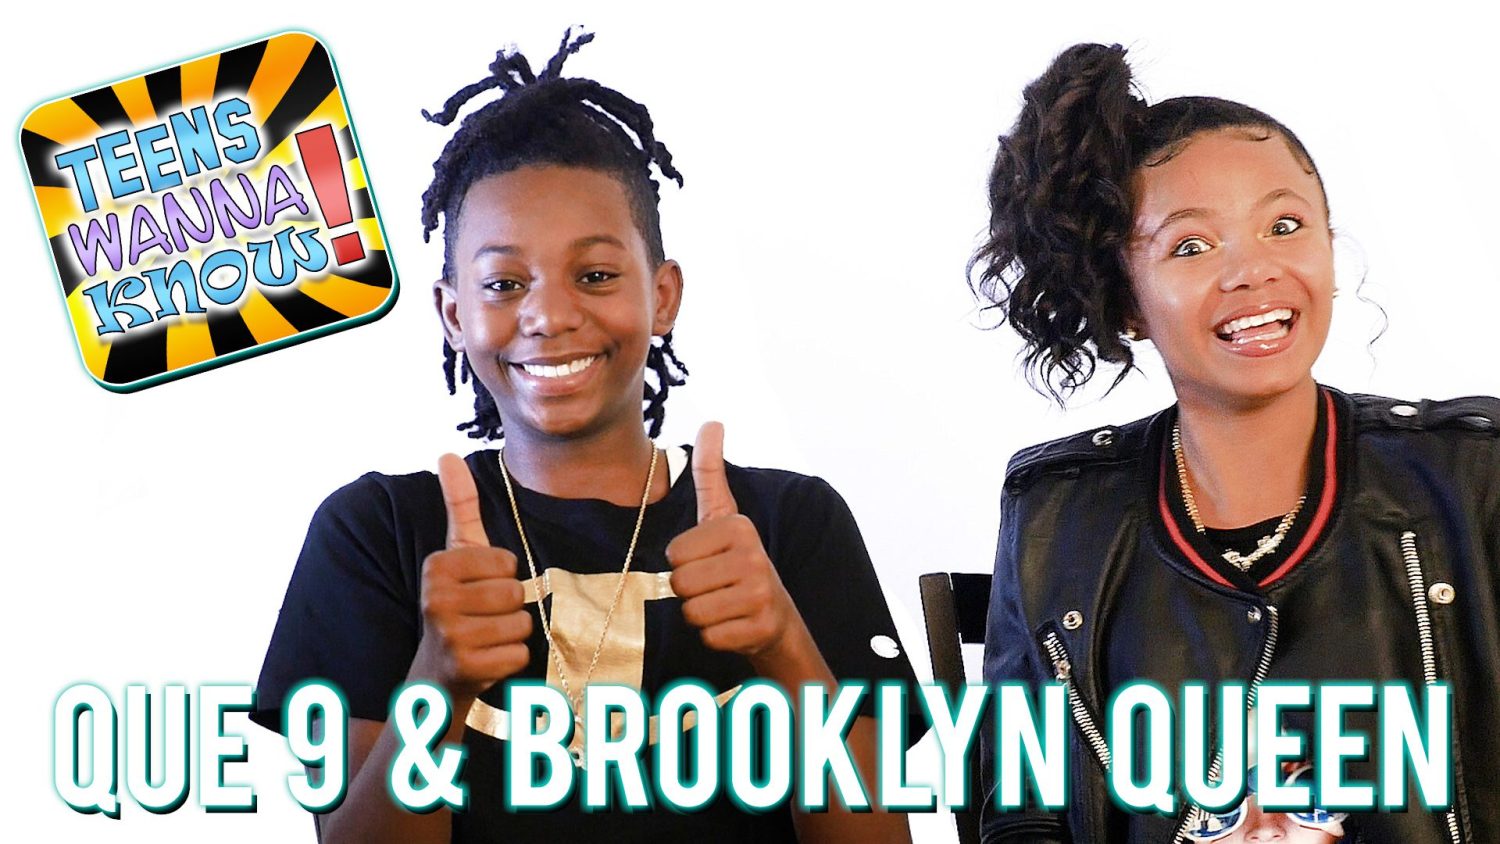 Brooklyn Queen and Que 9 Thumbnail